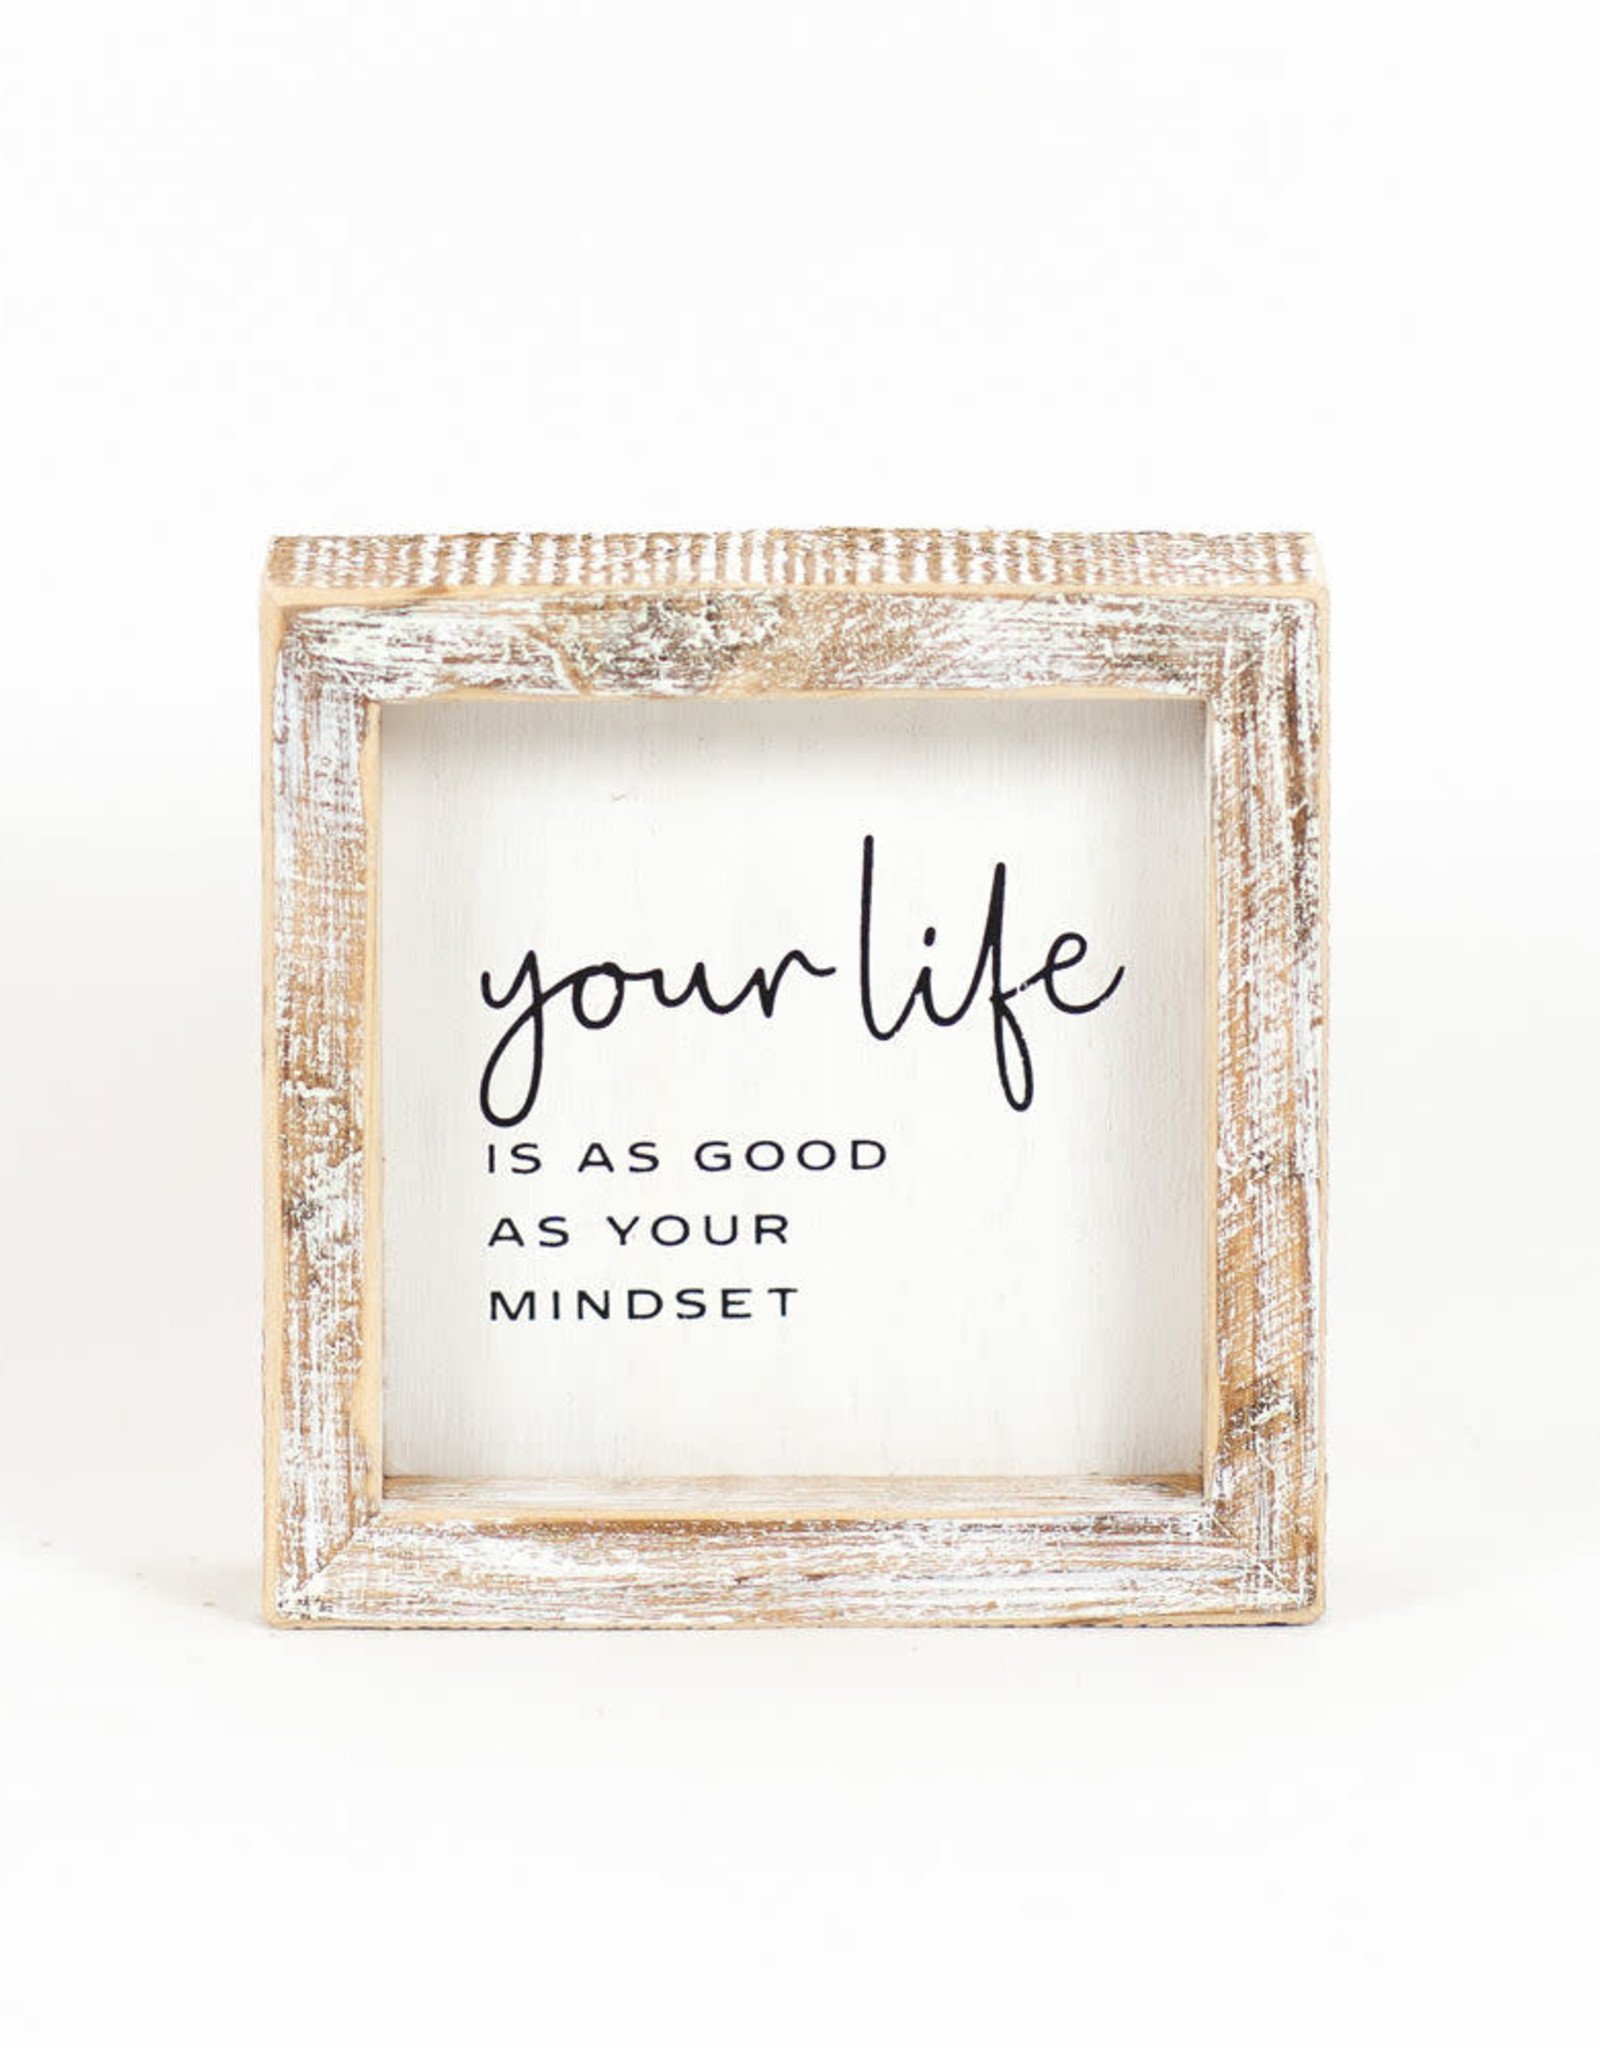 Home 11454 5X5X1.5 WOOD FRAMED SIGN (YOUR LIFE)